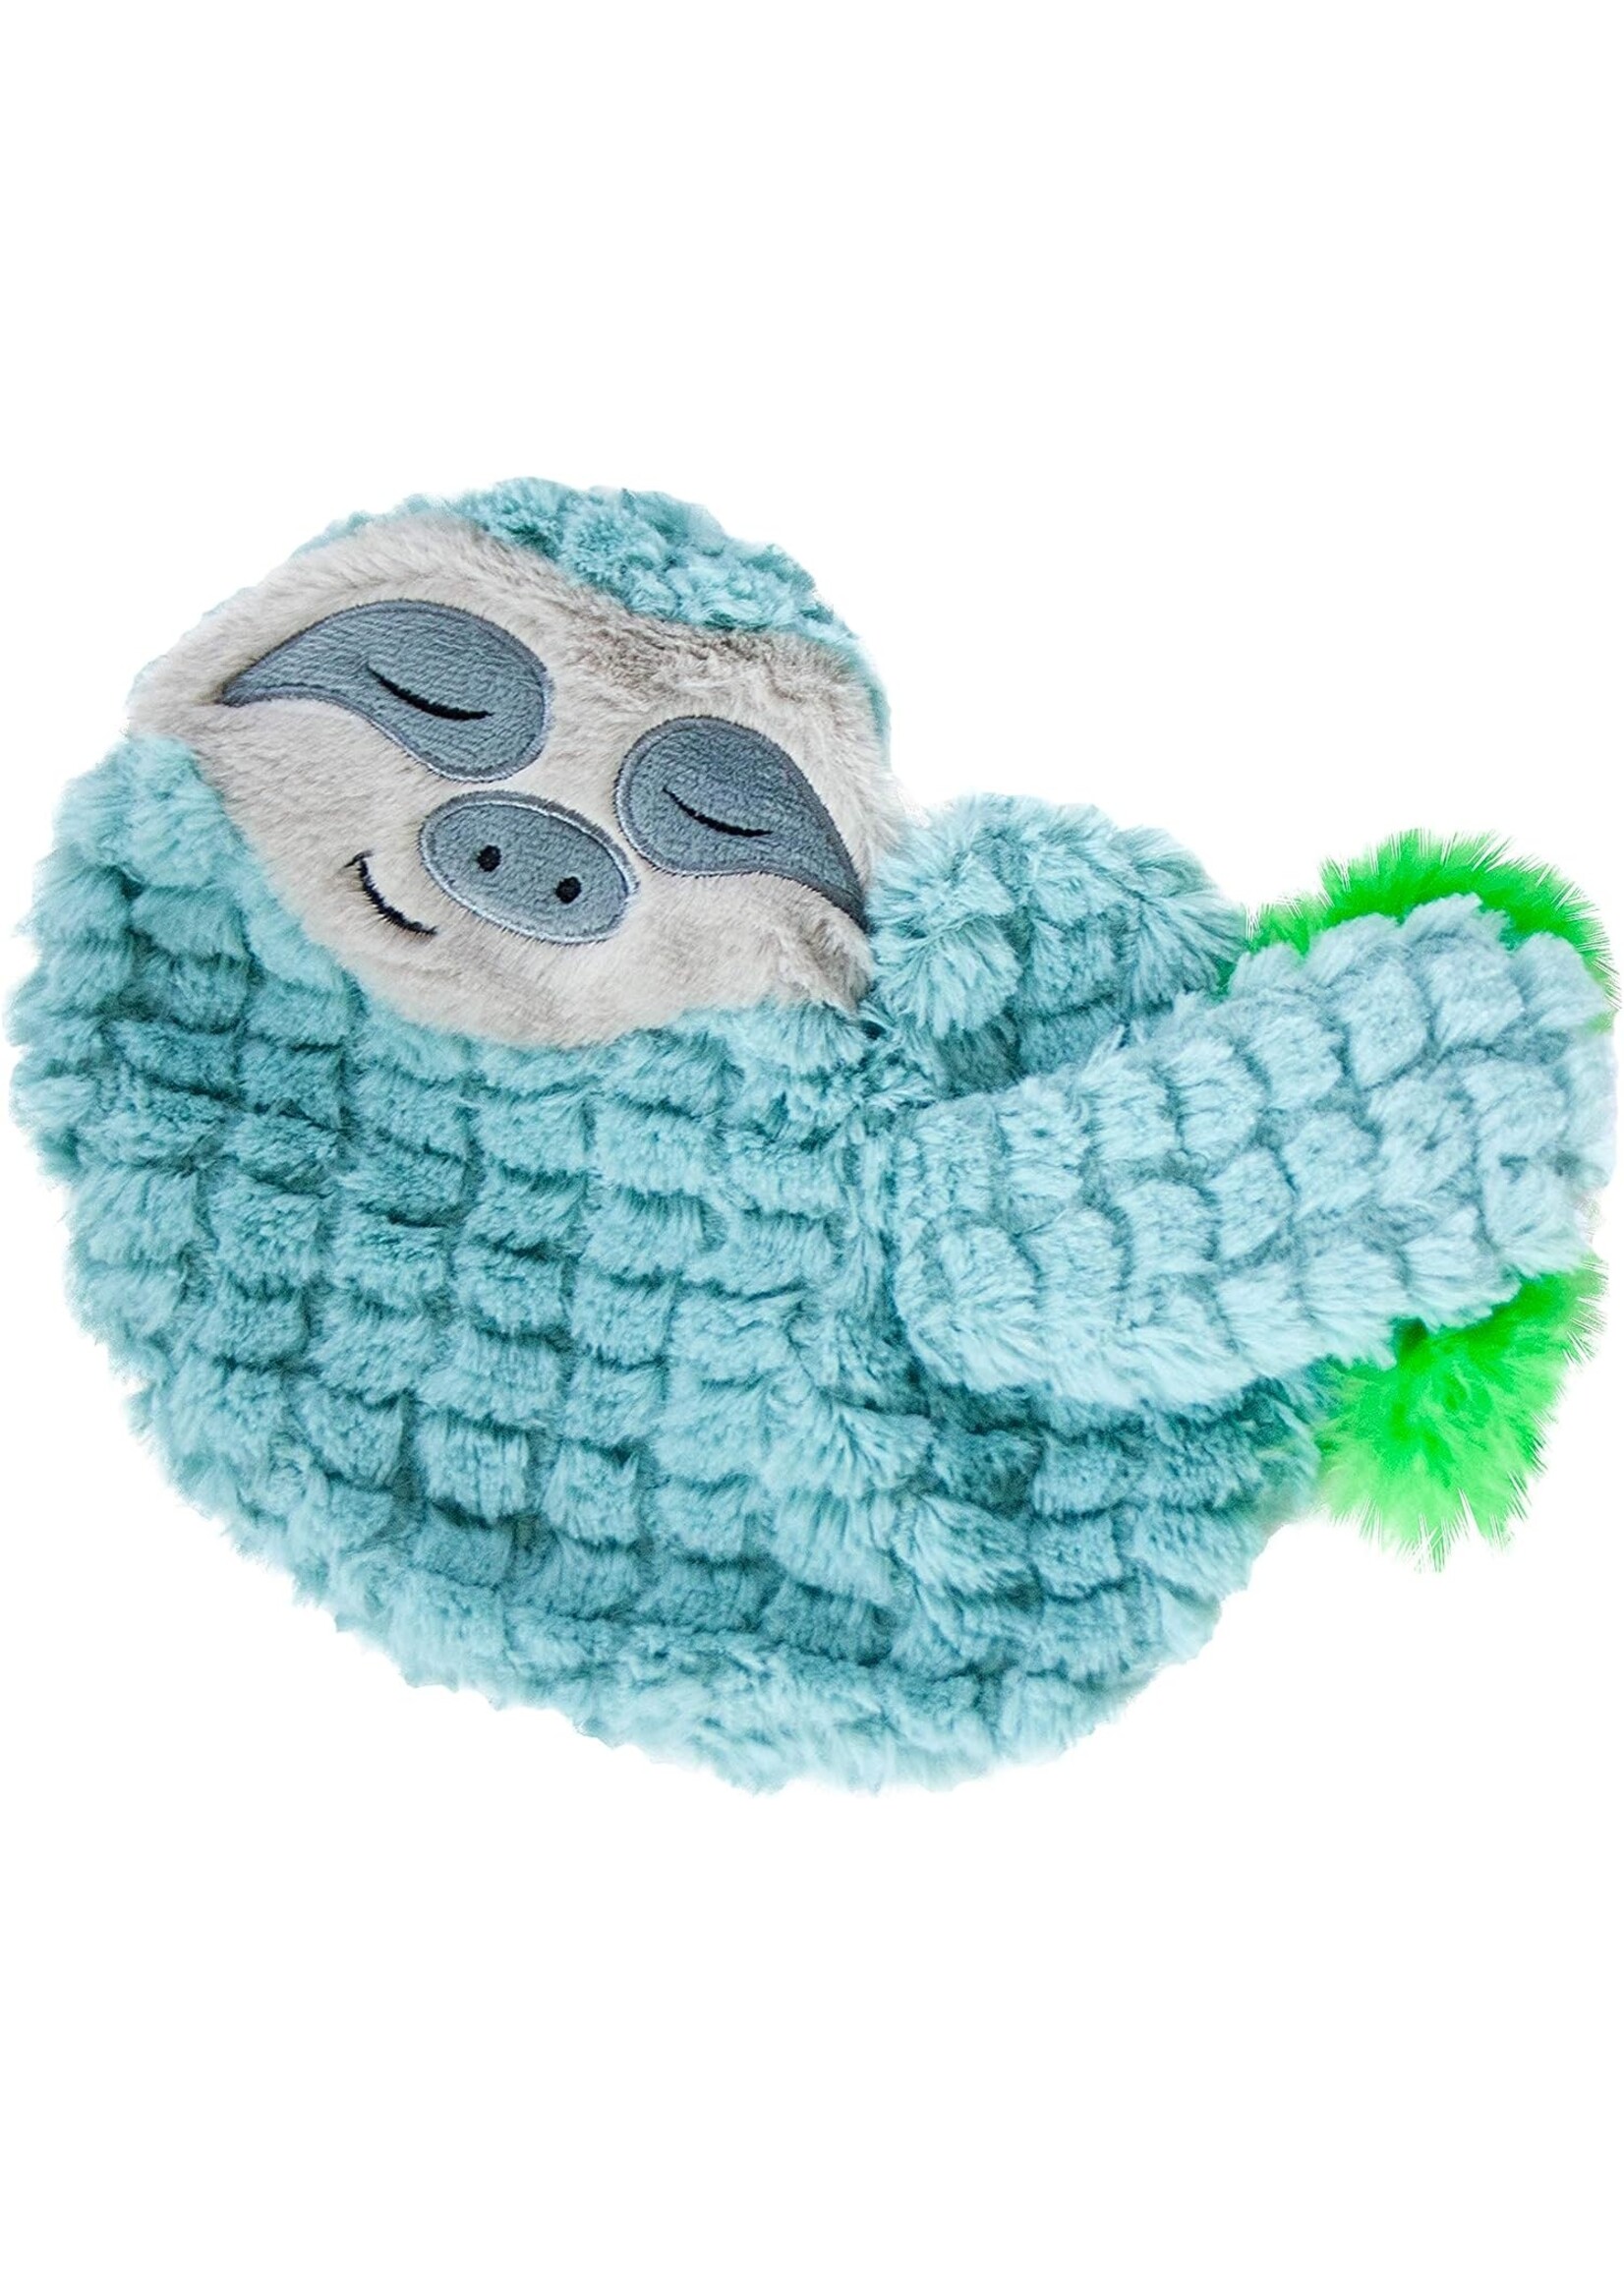 Petstage Petstages Purr Pillow Snoozin' Sloth Green Cat Calming Toy